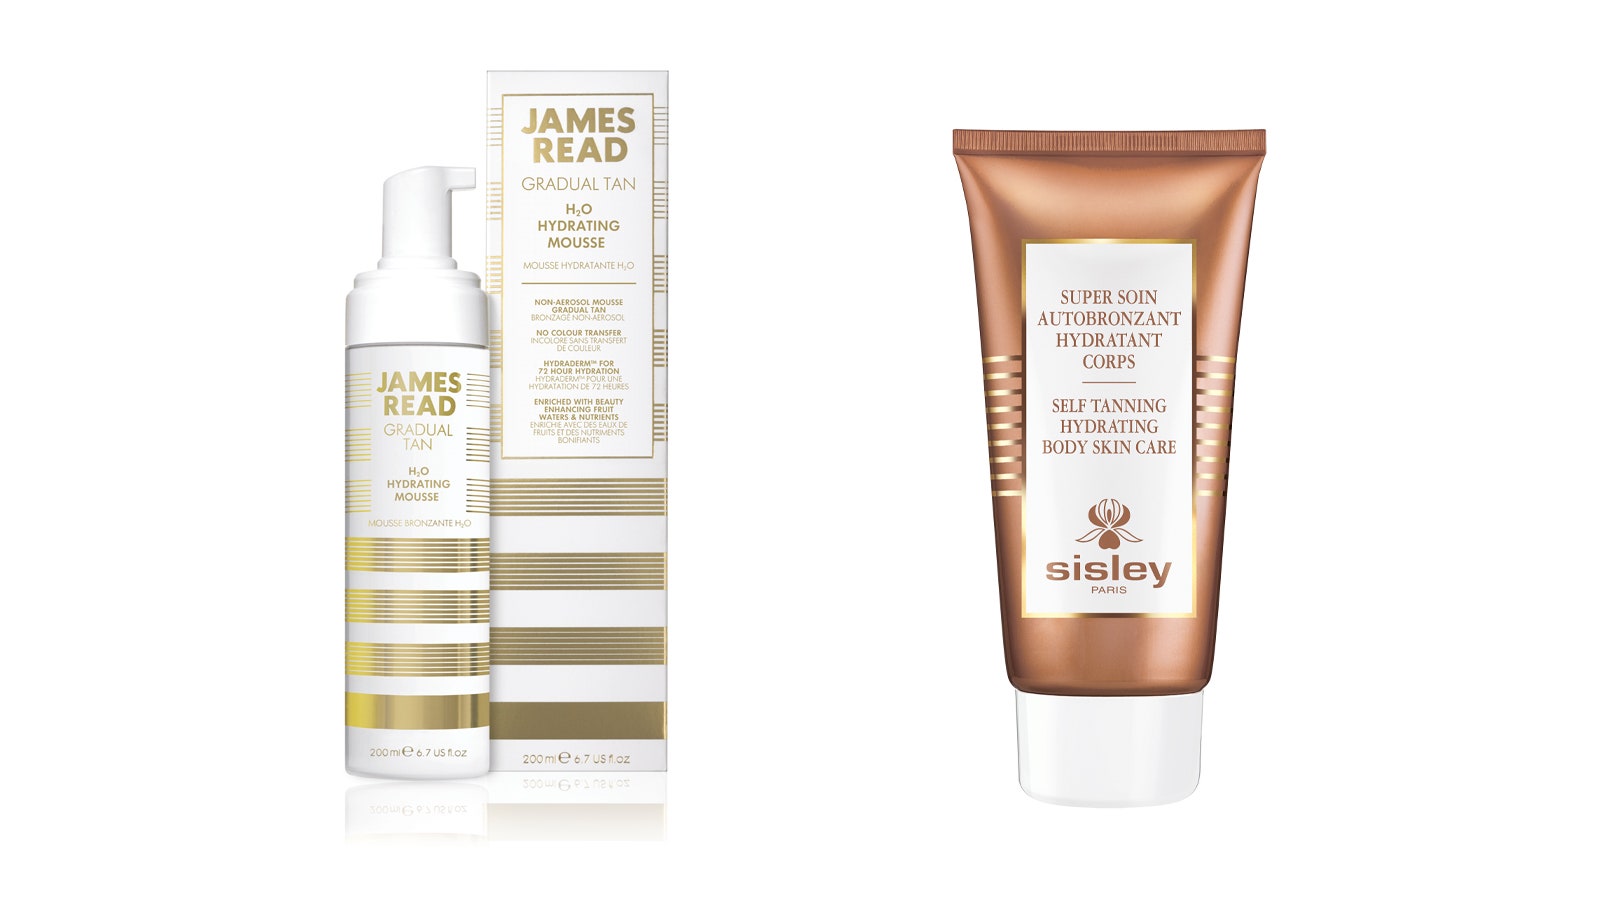 James Read H2O Hydrating Mousse Sisley Self Tanning Hydrating Body Skin Care